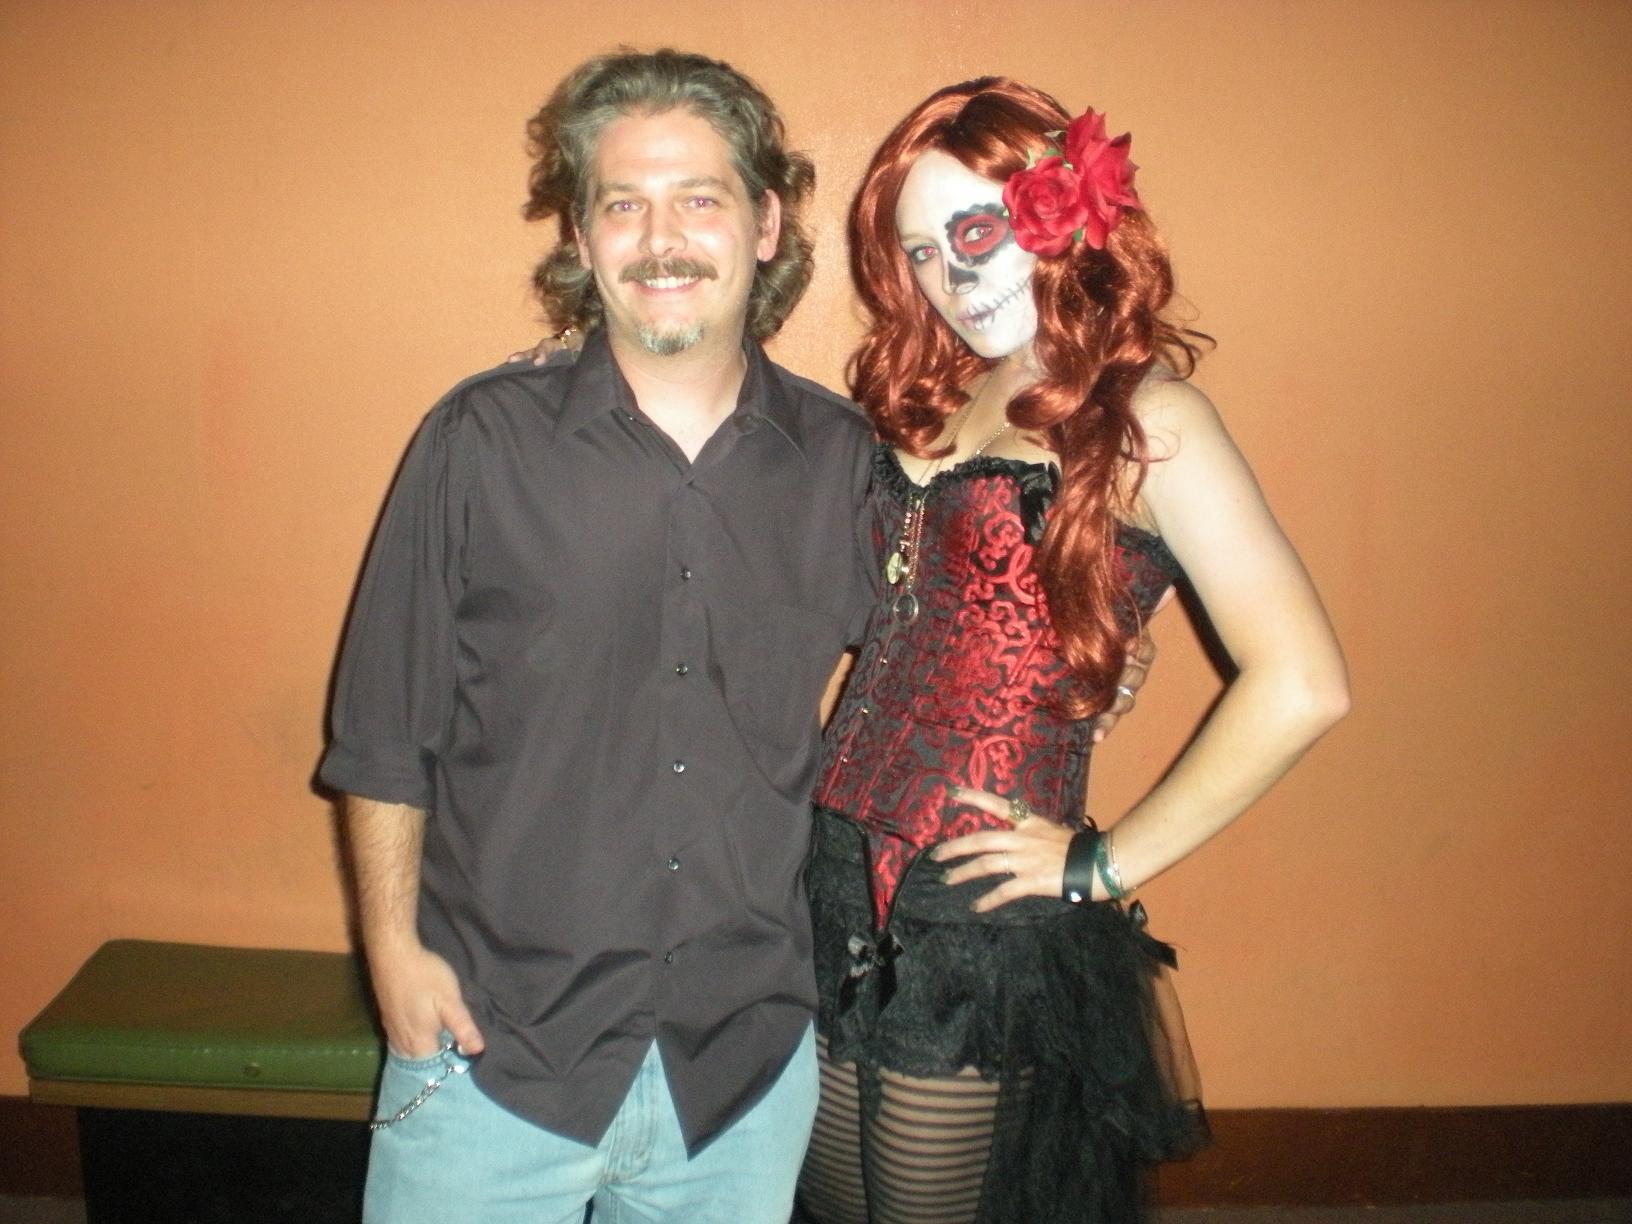 Heather Dorff at the 2011 Chicago Horror Film festival with Director Jeff Lyon.